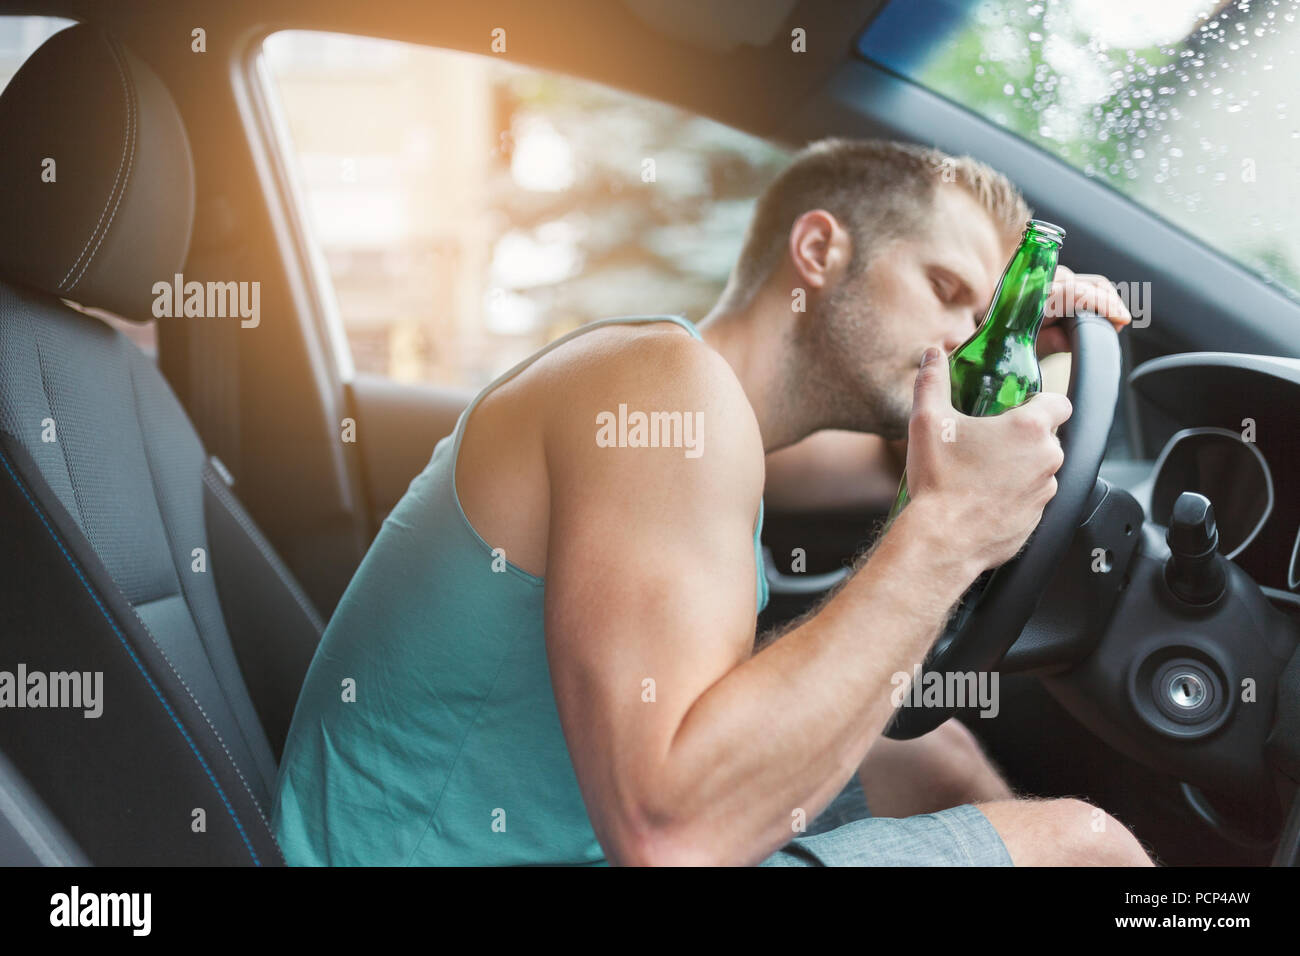 Drunk driver drinking behind the steering wheel of a car Stock Photo